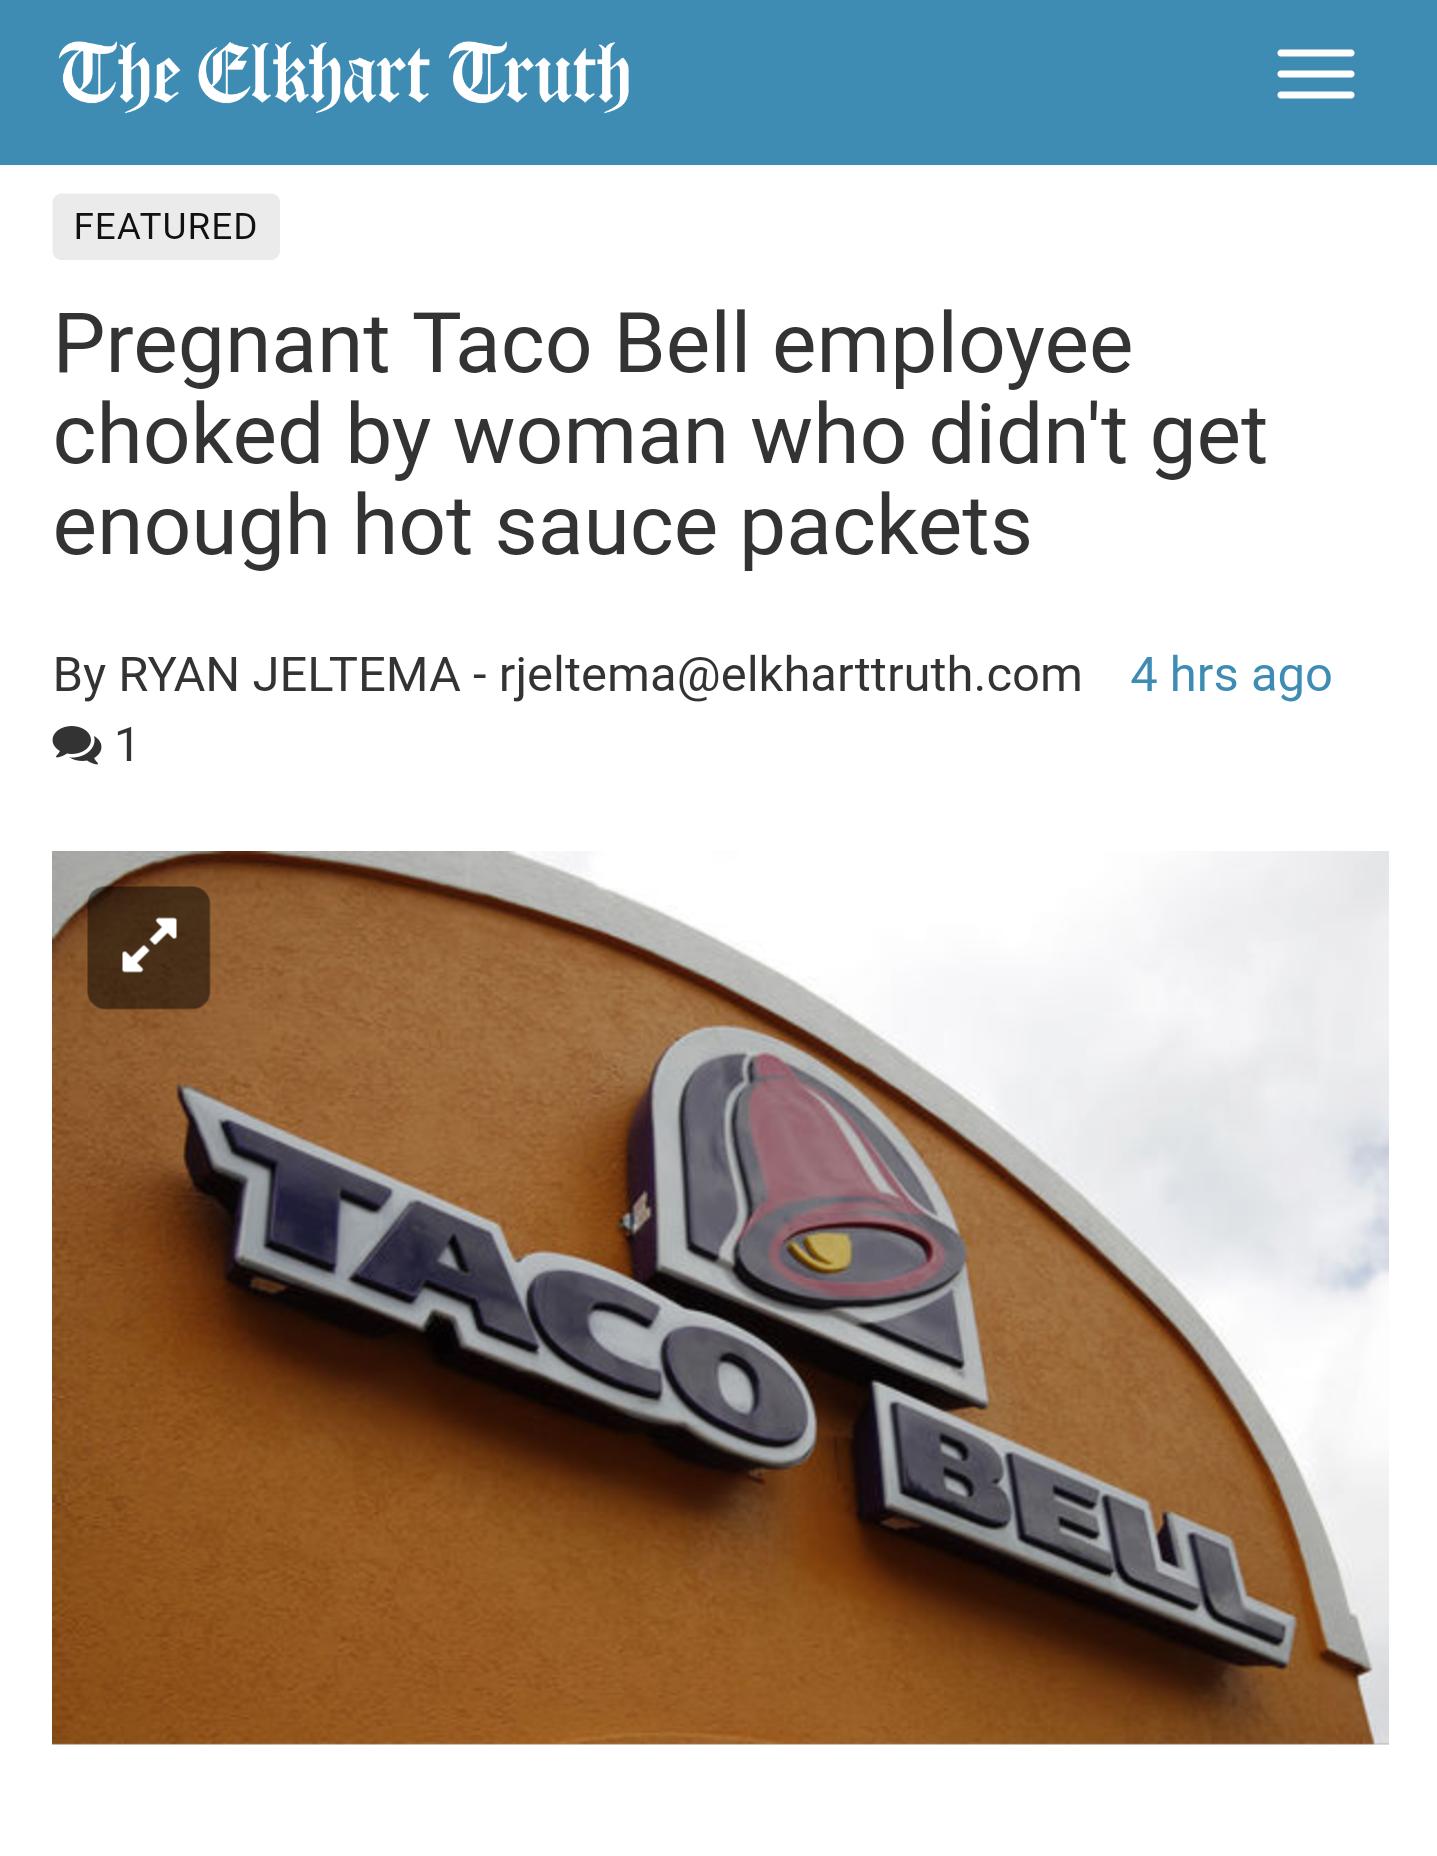 Taco bell story of pregnant employee getting choked by someone who didn't get enough hot sauce packets.